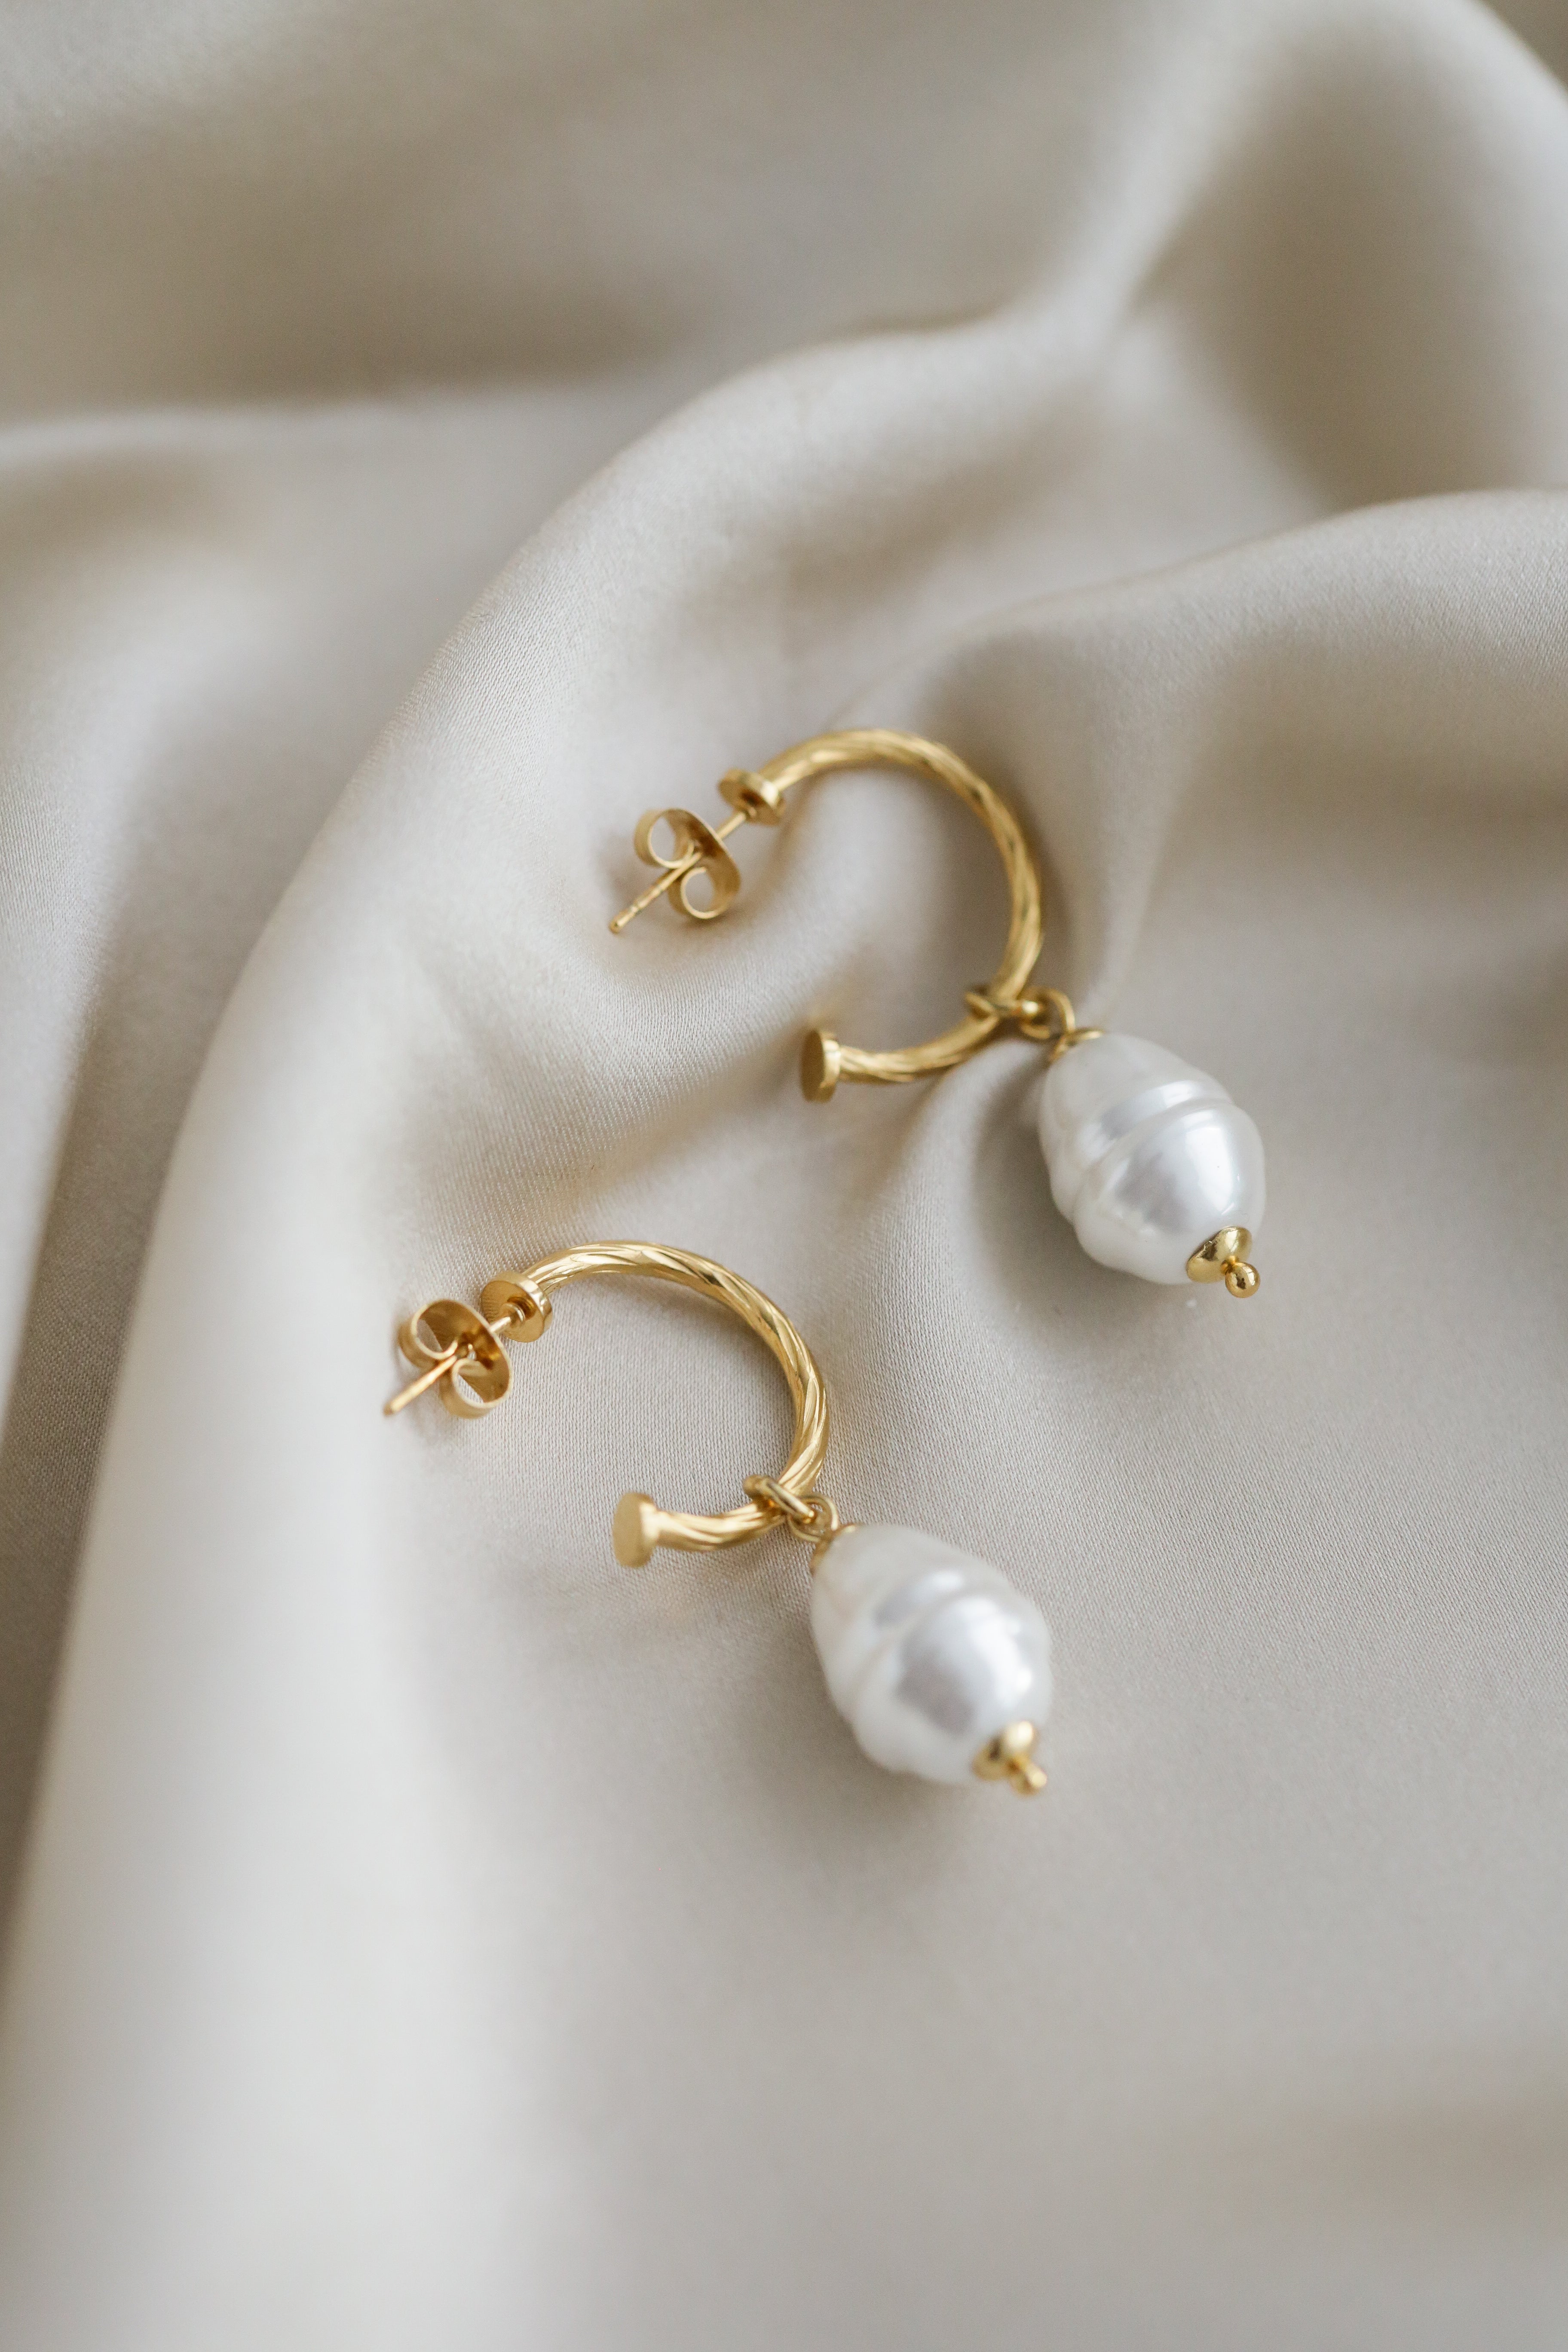 The Heart - Pearl Hoops - Boutique Minimaliste has waterproof, durable, elegant and vintage inspired jewelry